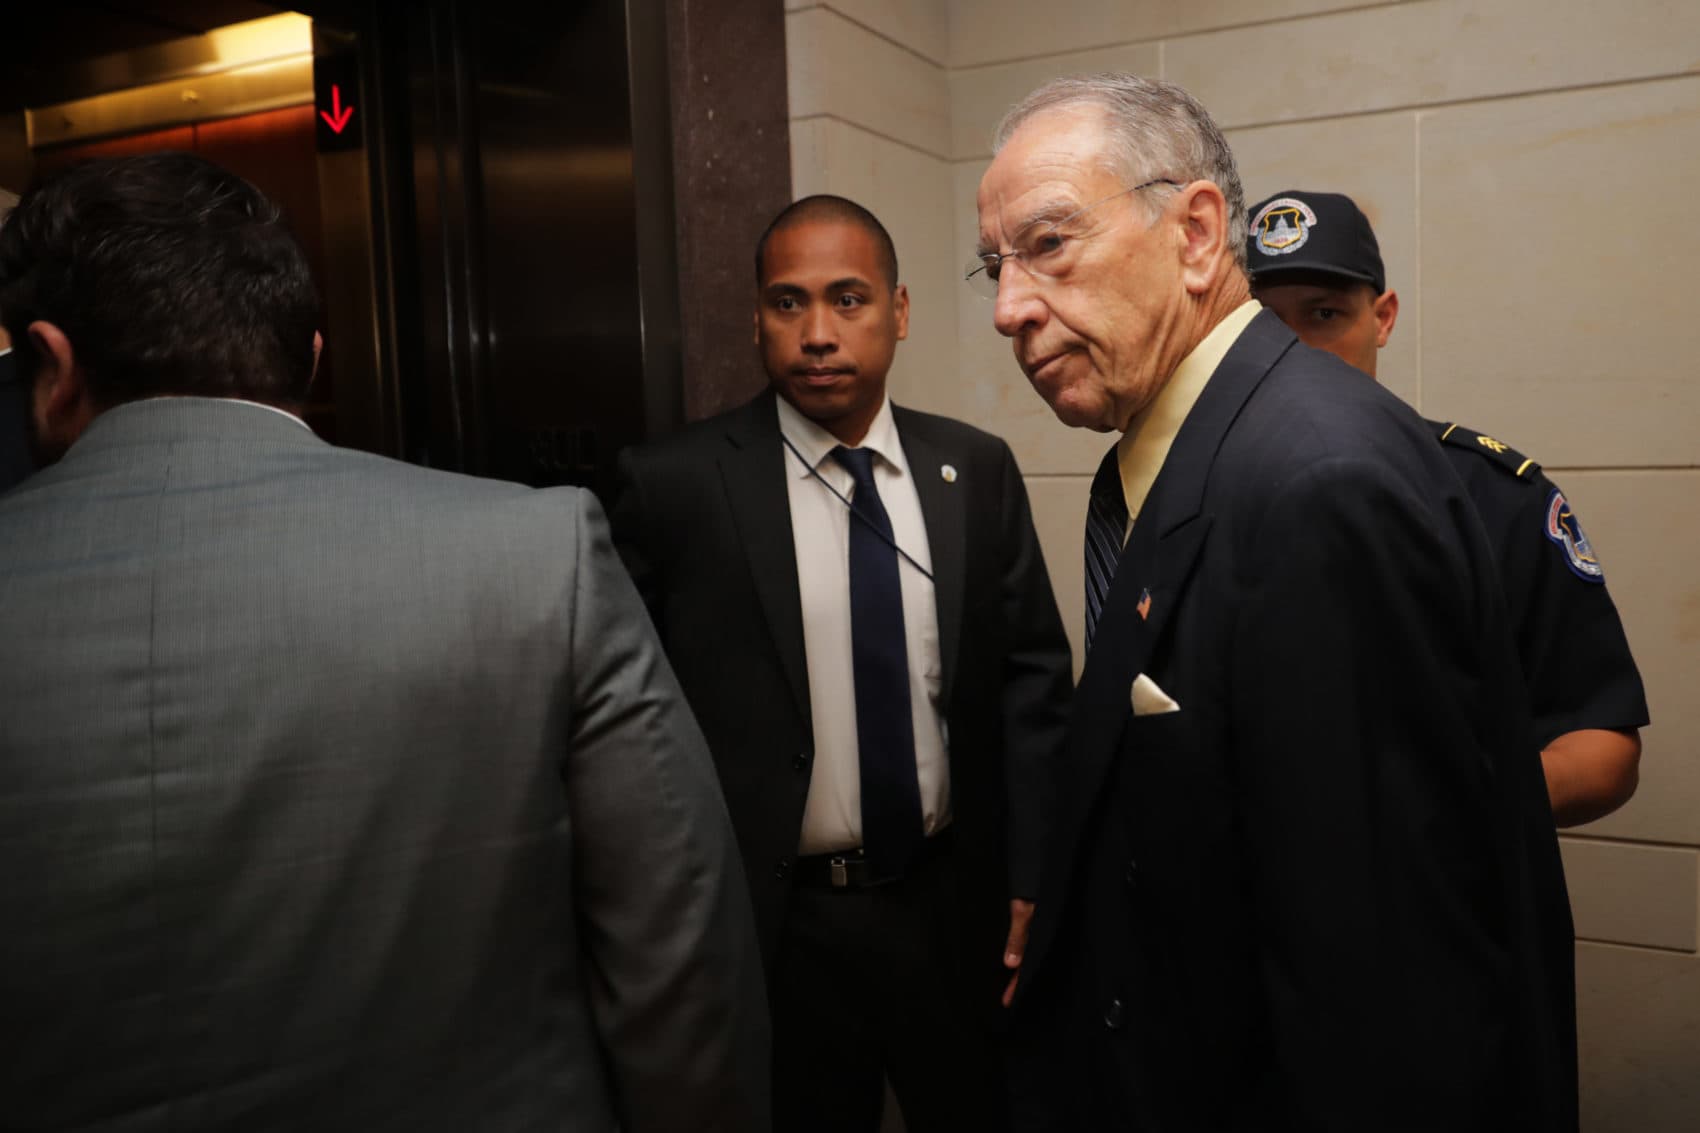 Senate Judiciary Committee Chairman Charles Grassley (R-IA) is surrounded by staff and security as he heads for a secure meeting space inside the U.S. Capitol Visitors Center to review the FBI report about alleged sexual misconduct by Supreme Court nominee Judge Brett Kavanaugh on Thursday in Washington, D.C. (Photo by Chip Somodevilla/Getty Images)